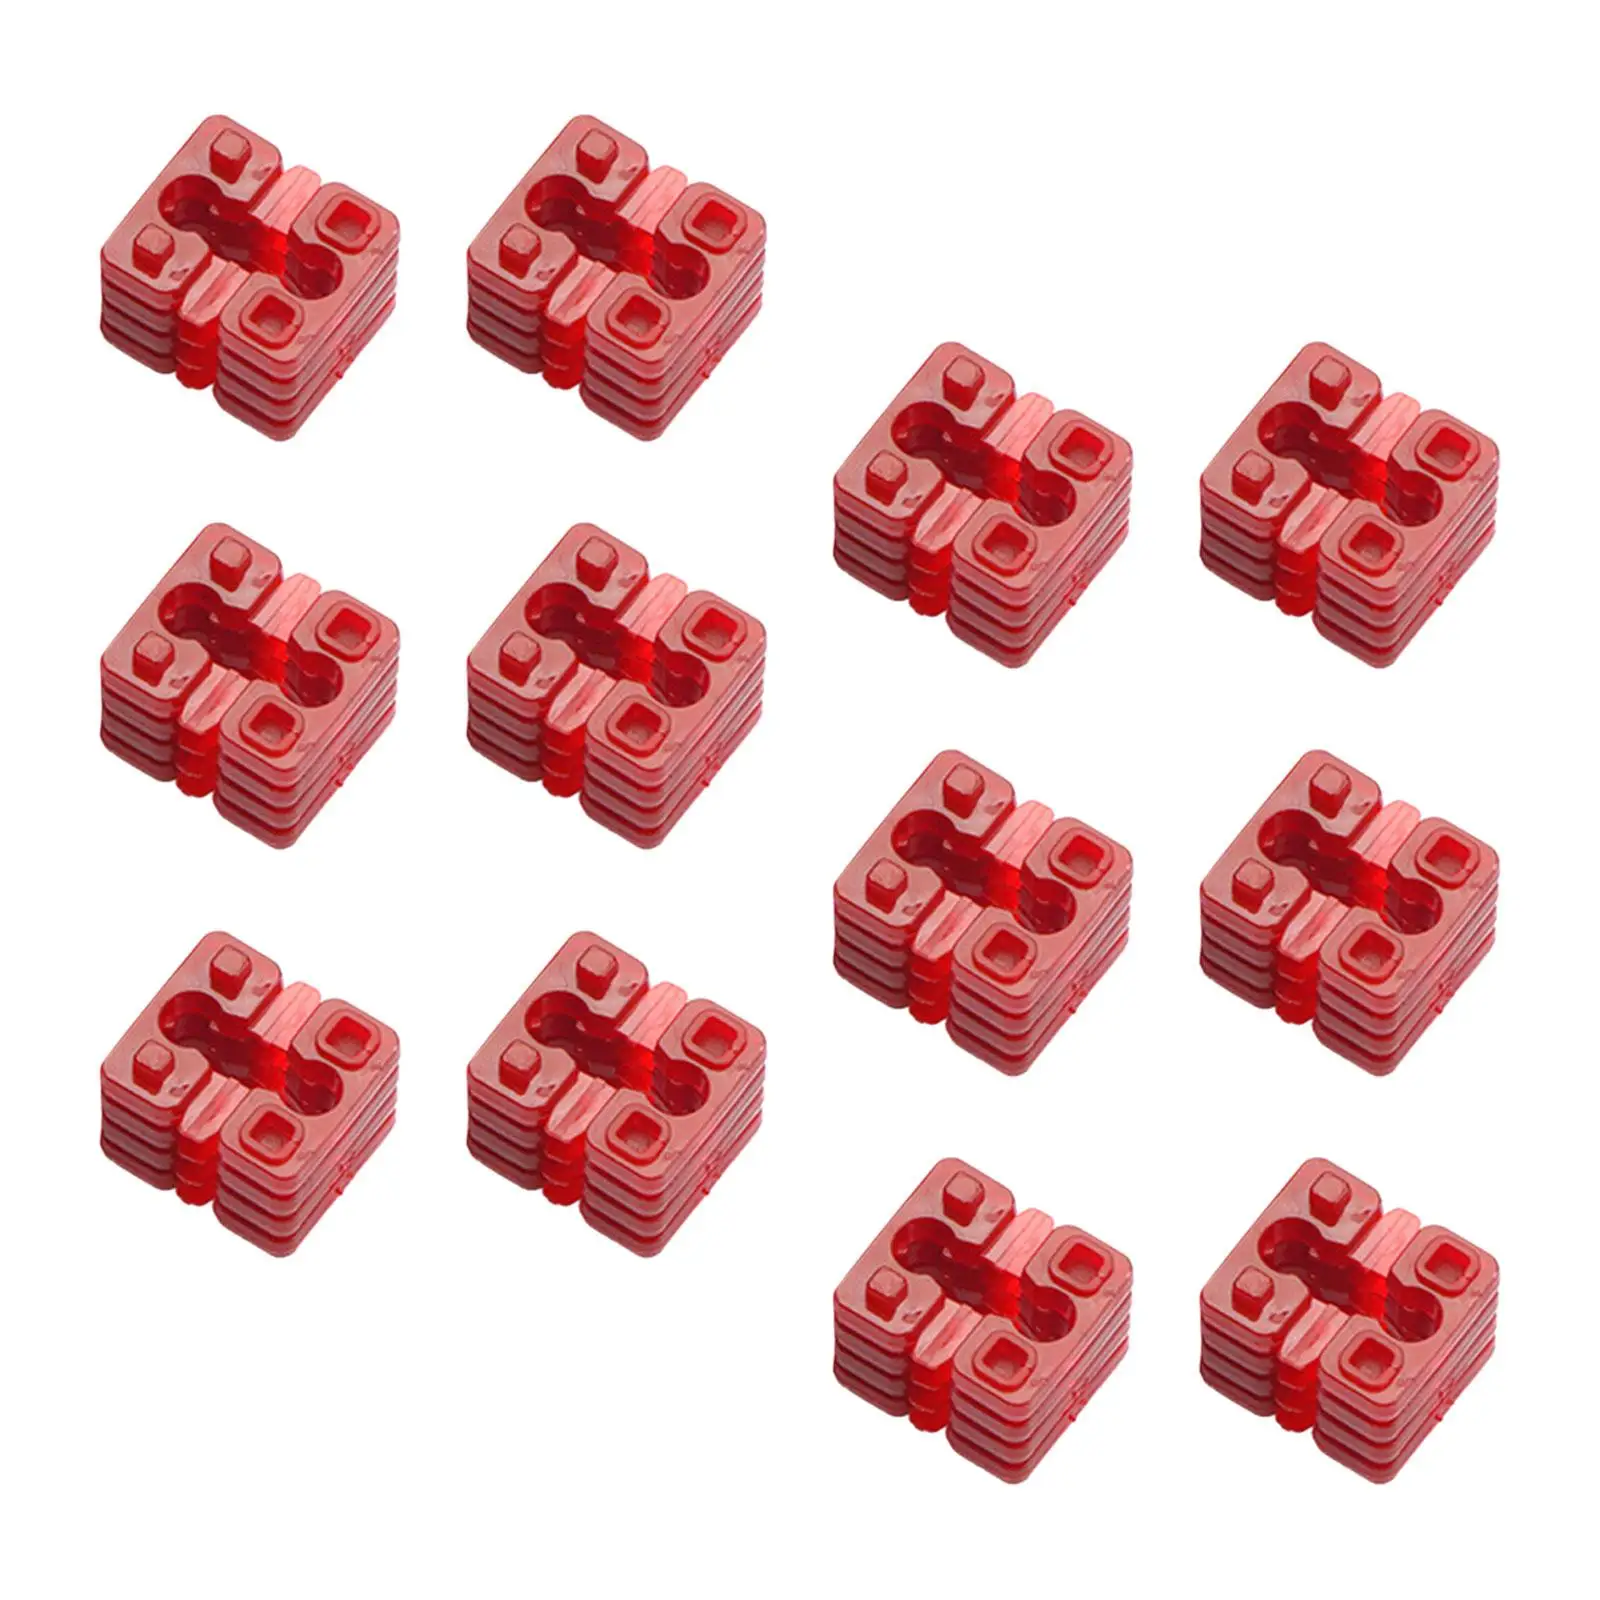 48Pcs Electrical Spacer Repairing Spare Parts Replacements for Electrical Box Light Switch Spacer Switch Receptacle Spacers